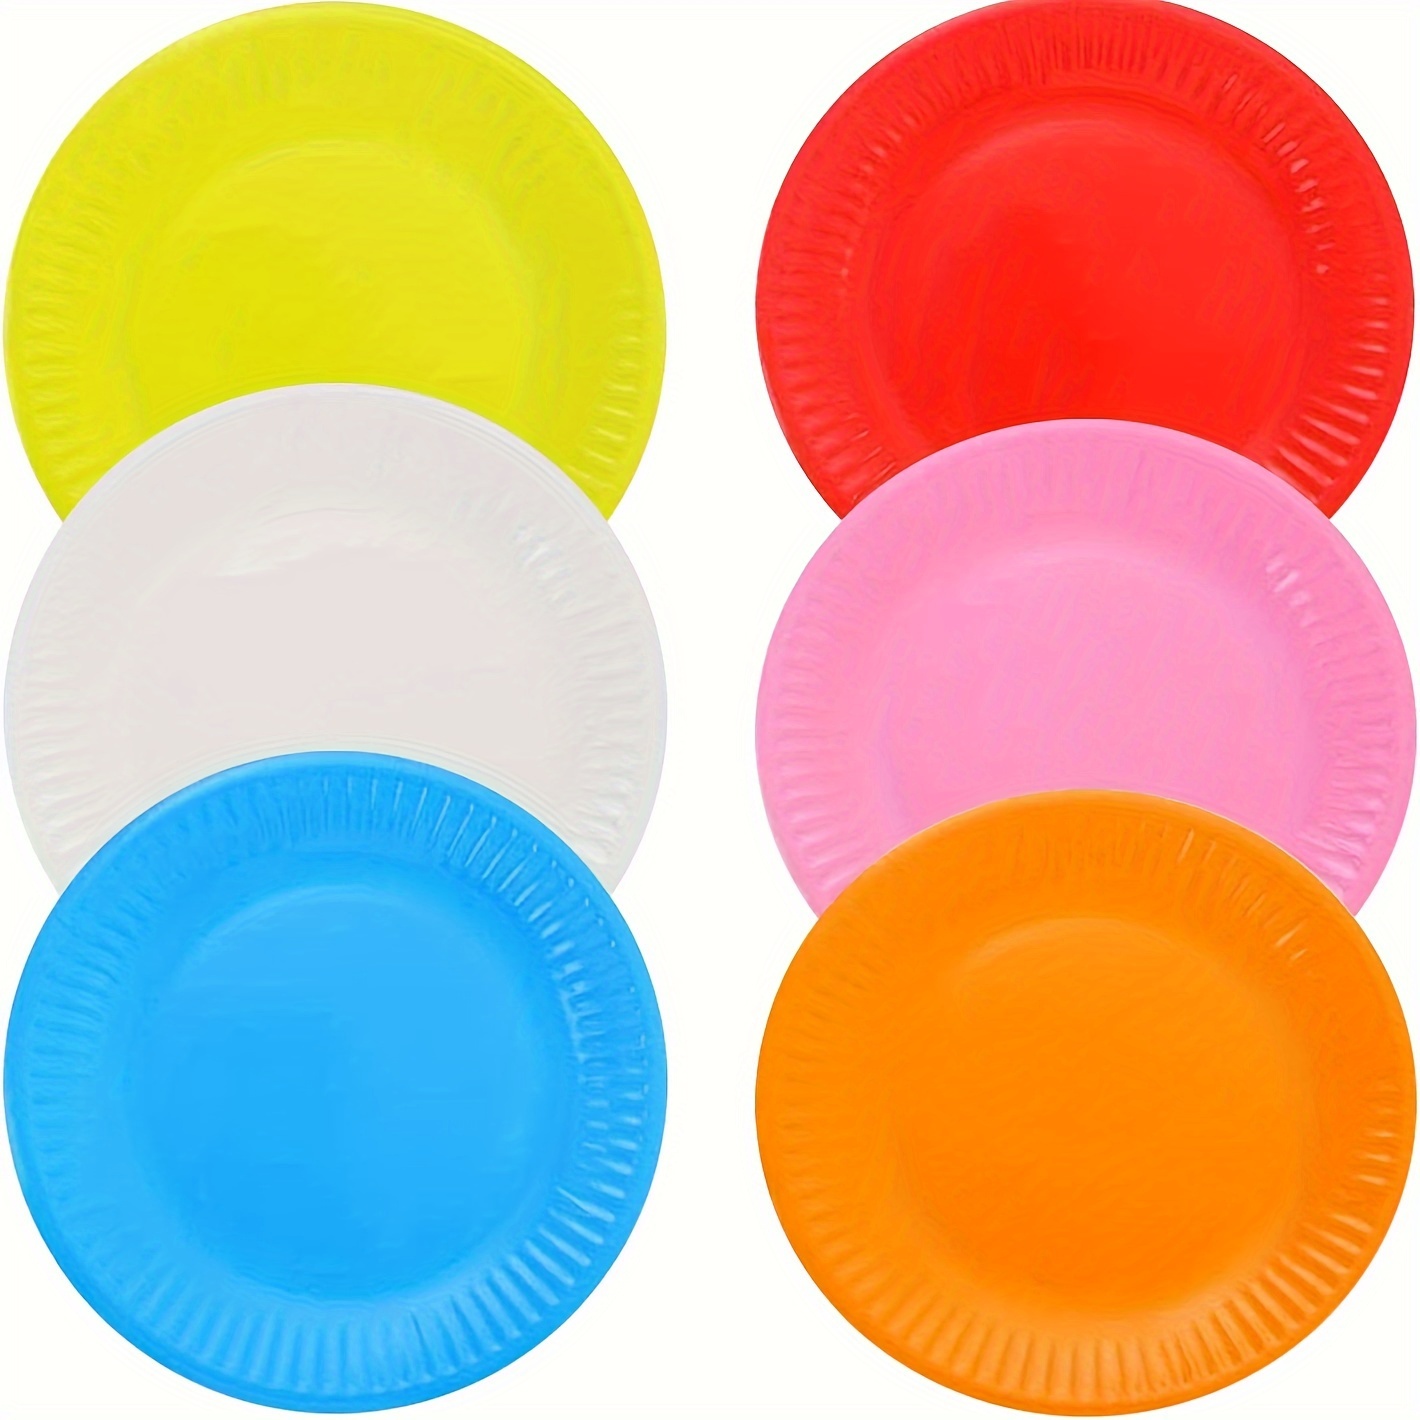 

Pack of 60, Vibrant DIY Paper Plates, Festive Paper Plates, Circular Plates, Disposable Plates, Party Essentials, Disposable Dinnerware, Ideal for Birthday Bashes and BBQ Gatherings